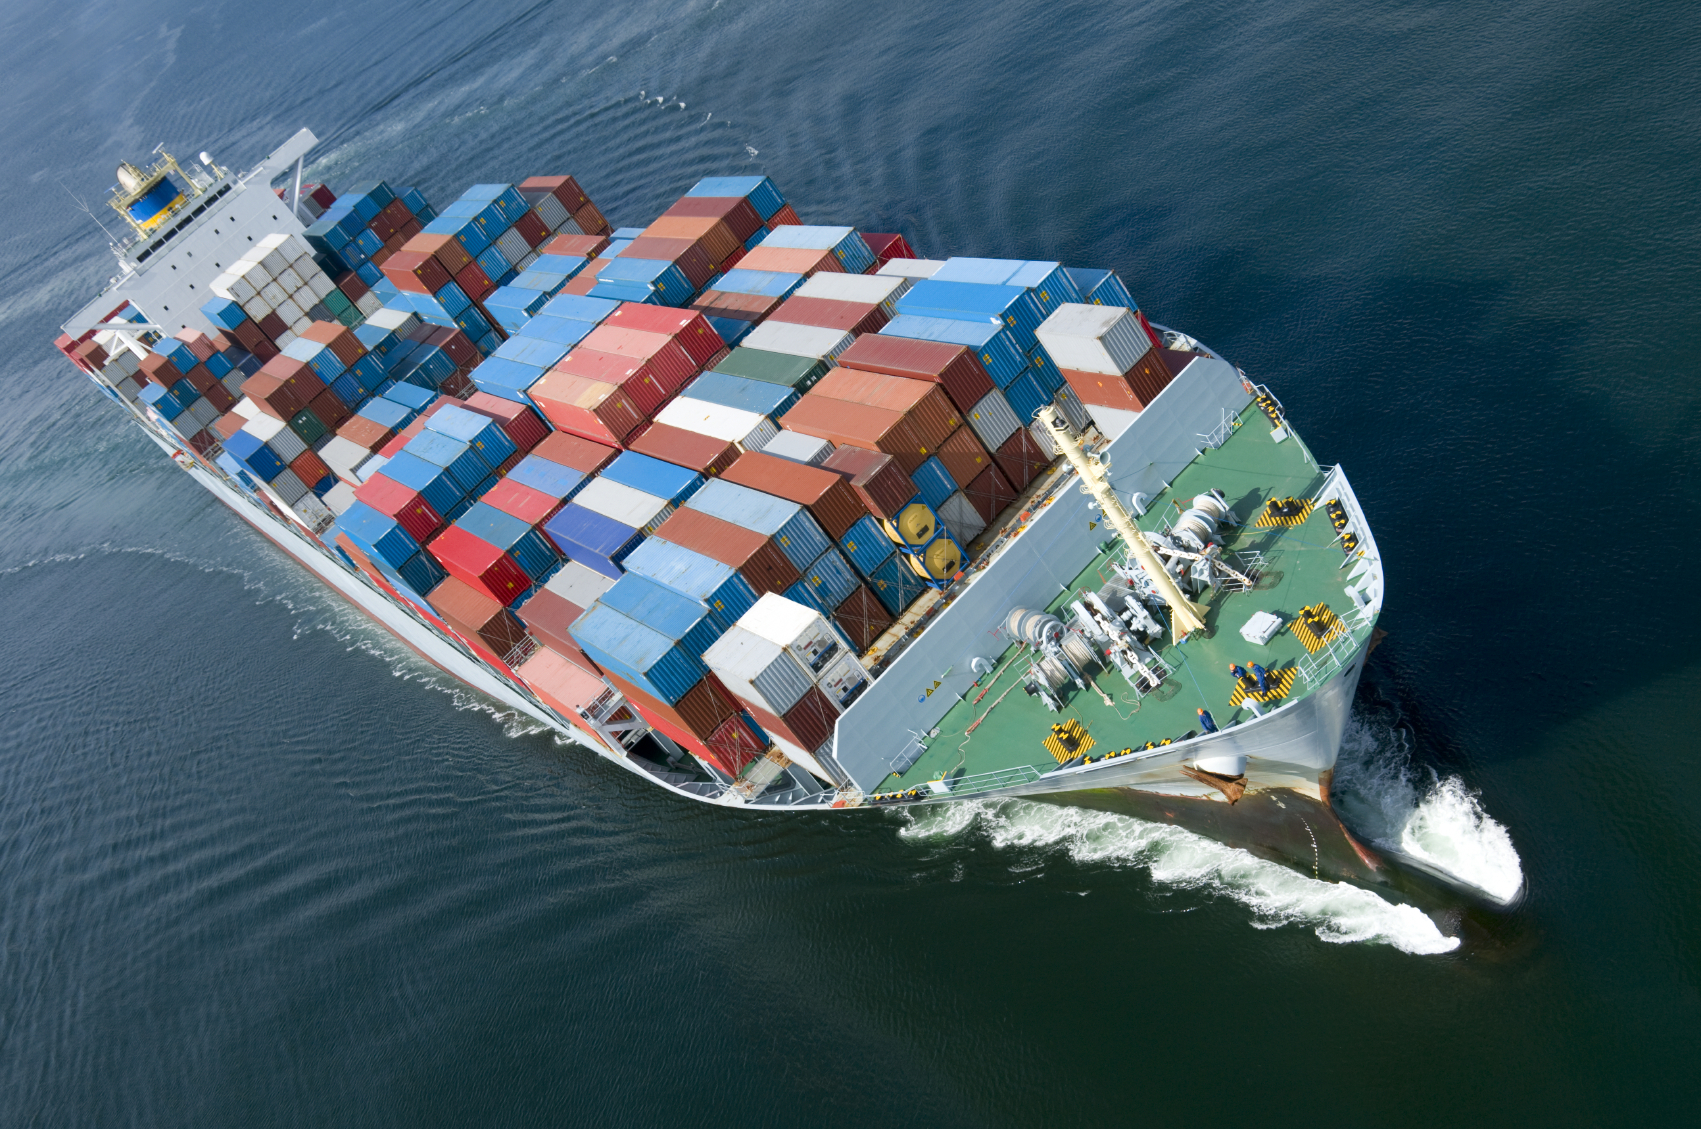 Shipping confidence slowing down, says Moore Stephens